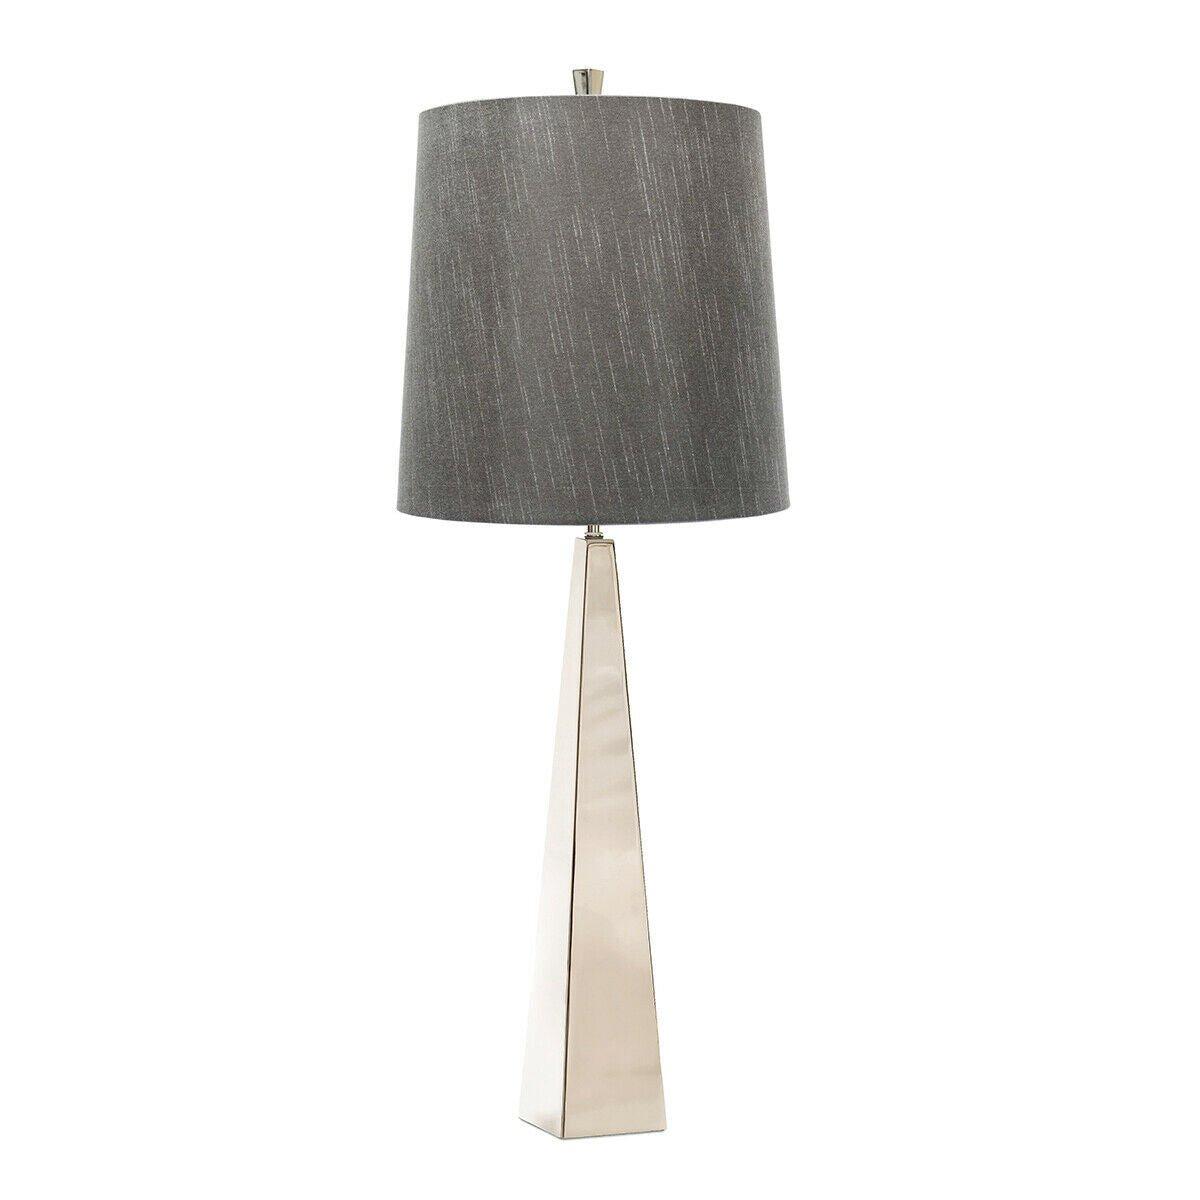 Square Table Lamp Dark Grey Shade Highly Polished Nickel LED E27 60W